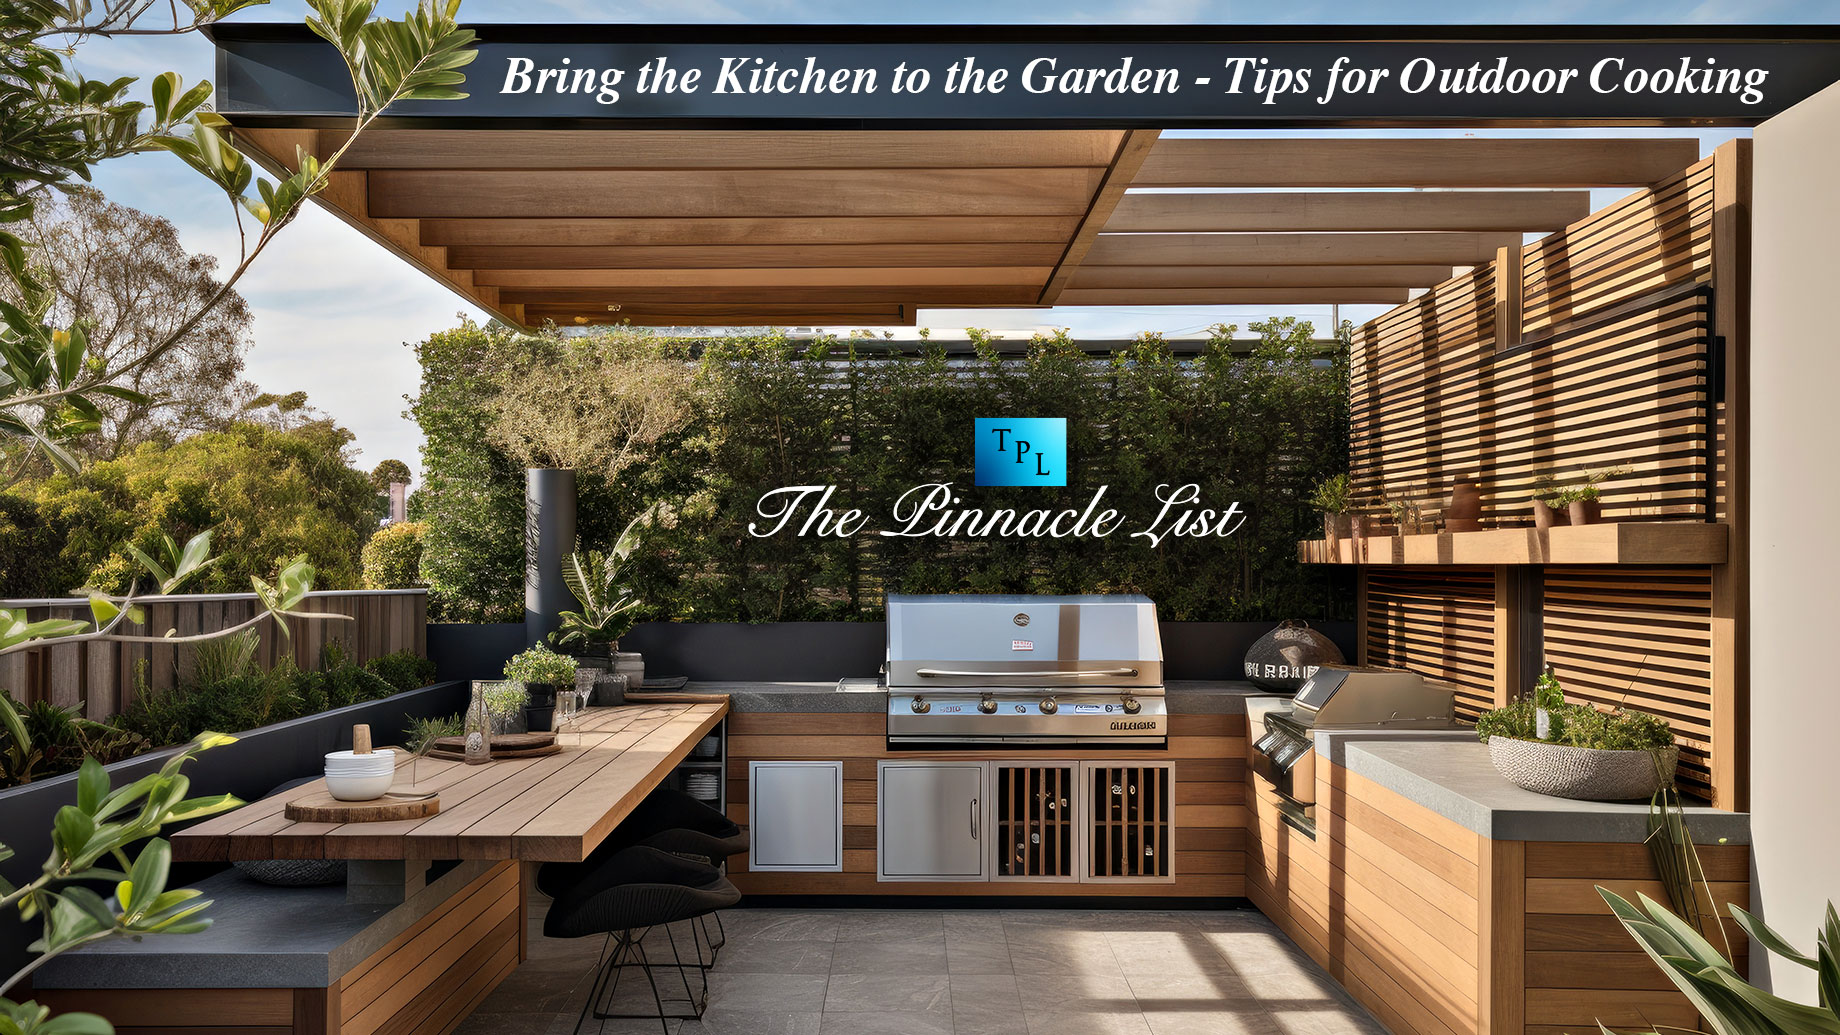 Bring the Kitchen to the Garden - Tips for Outdoor Cooking